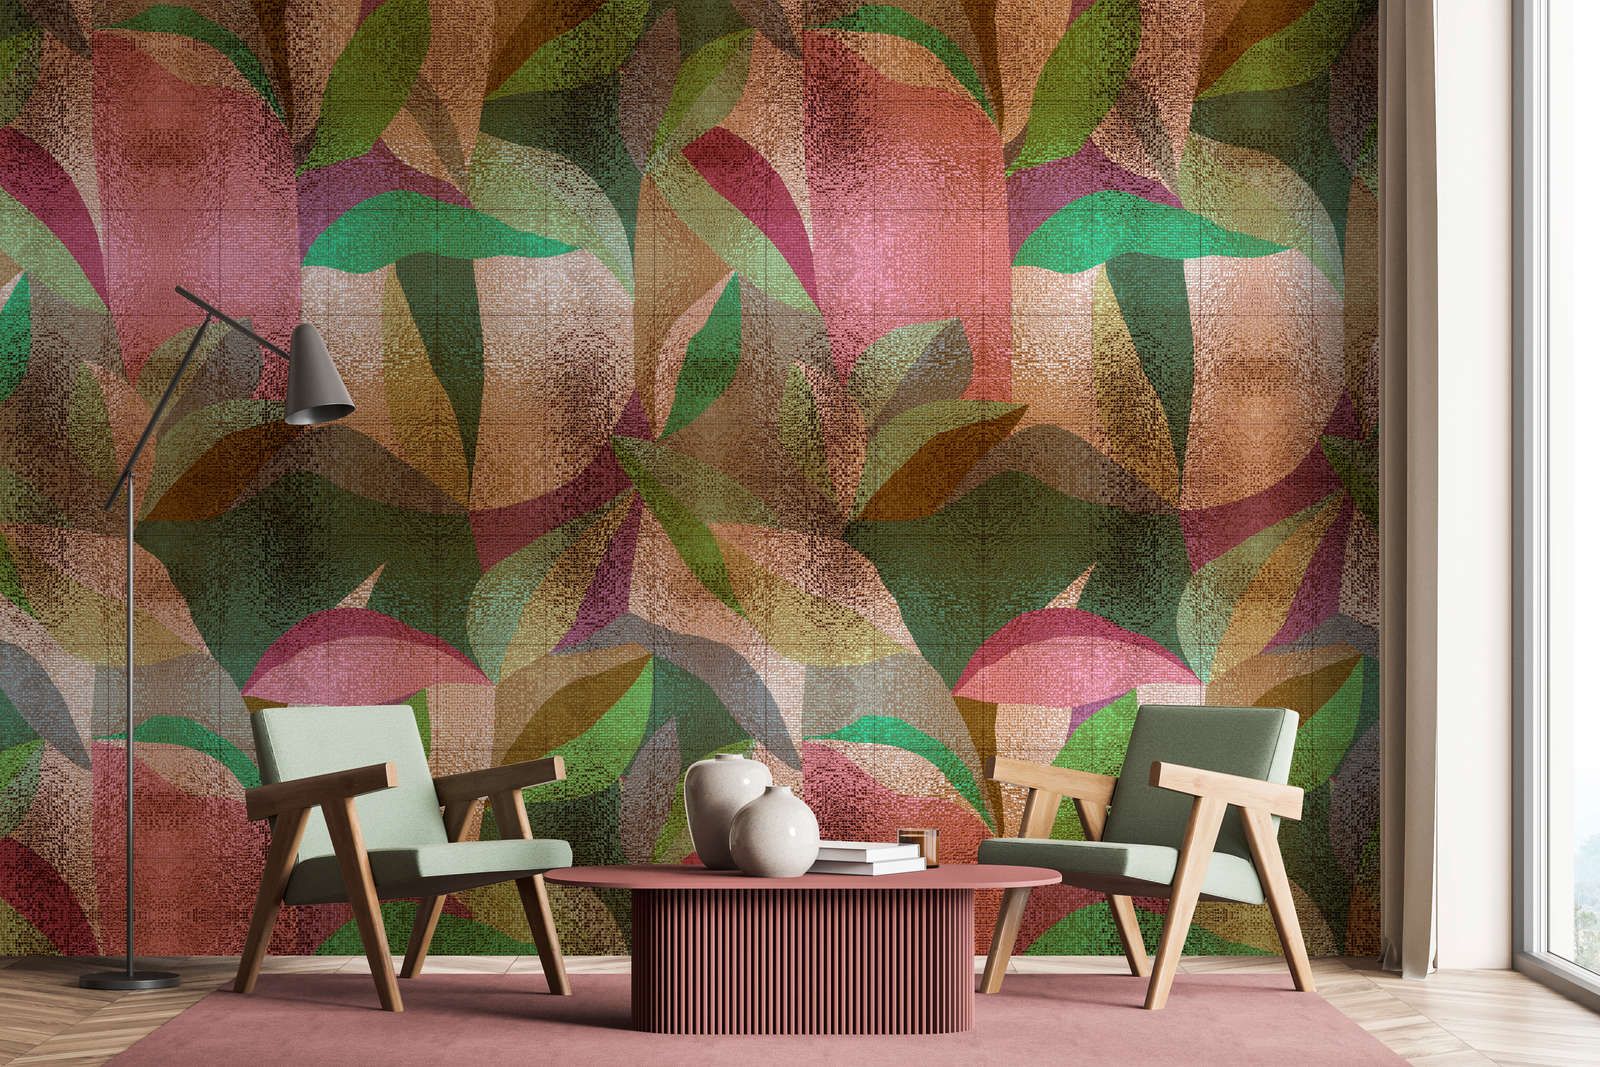             Photo wallpaper »grandezza« - Abstract colourful leaf design with mosaic structure - Smooth, slightly shiny premium non-woven fabric
        